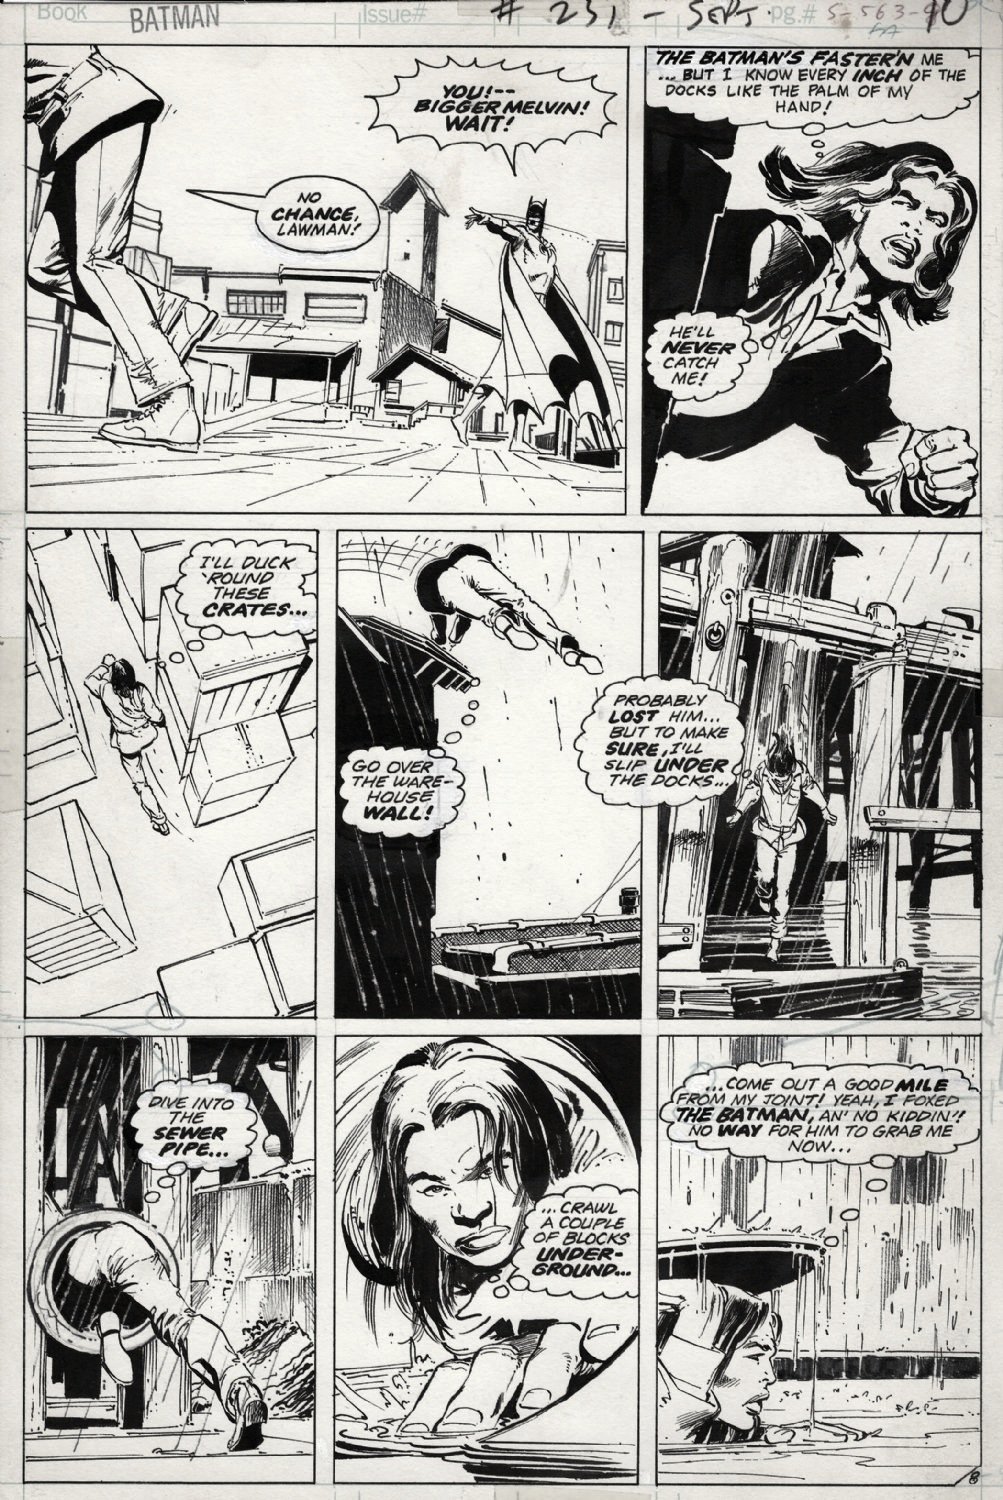 ADAMS, NEAL - Batman #251 pg 8, all by Neal, rare pencils & inks. Batman  chases Joker henchman, in Stephen Donnelly's ADAMS, NEAL - DC, Marvel, etc.  art, pages, dailies Comic Art Gallery Room